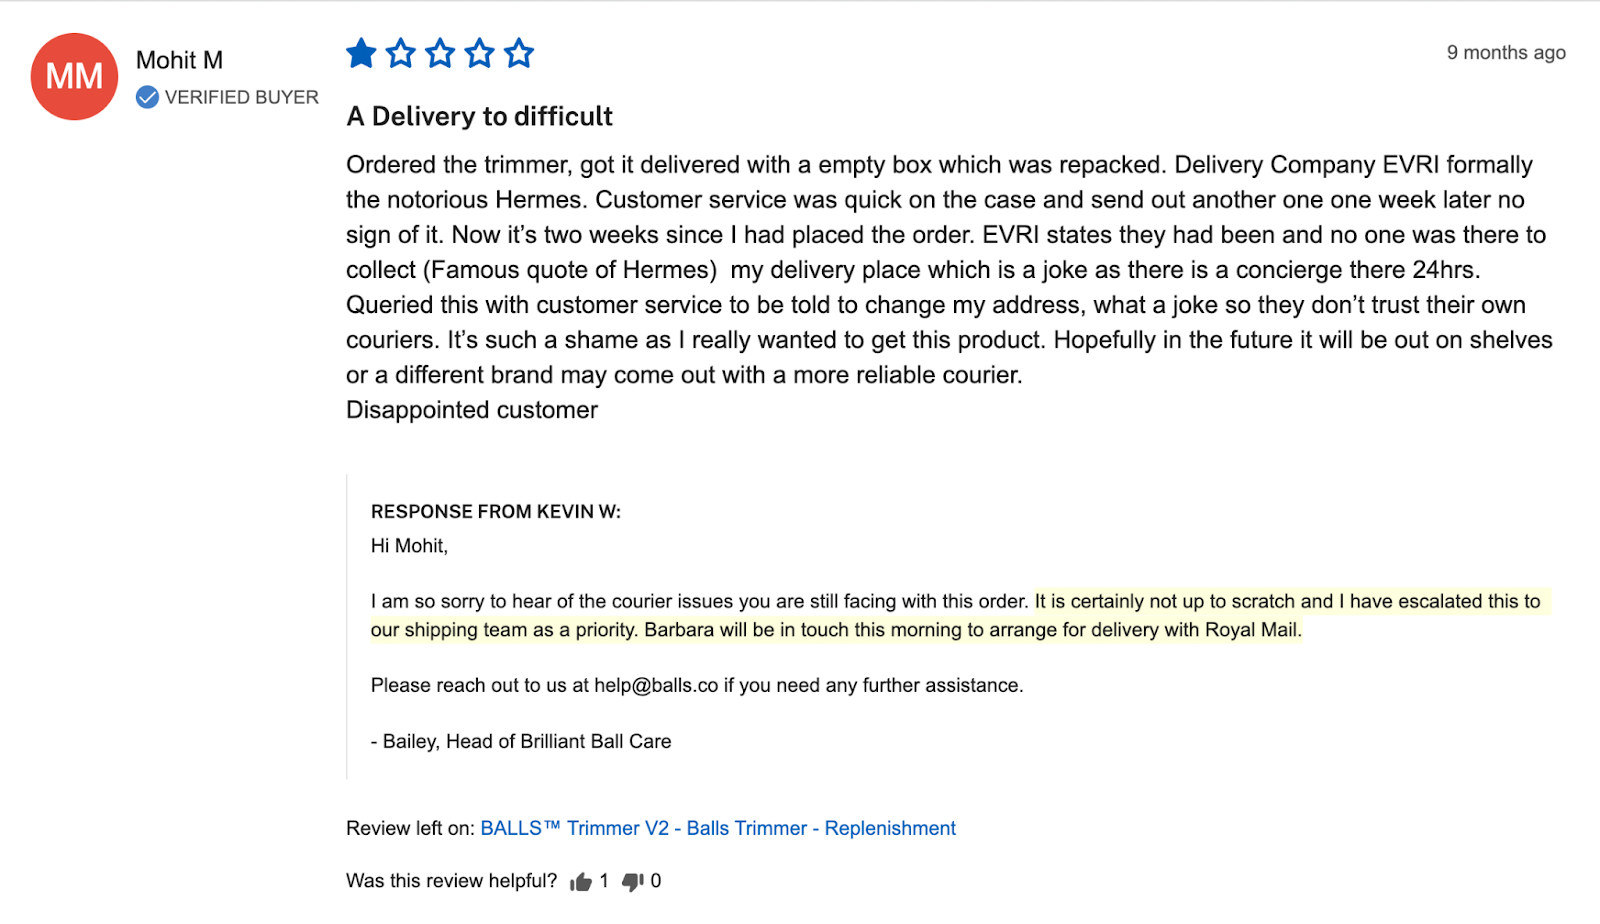 Negative review due to delivery issues